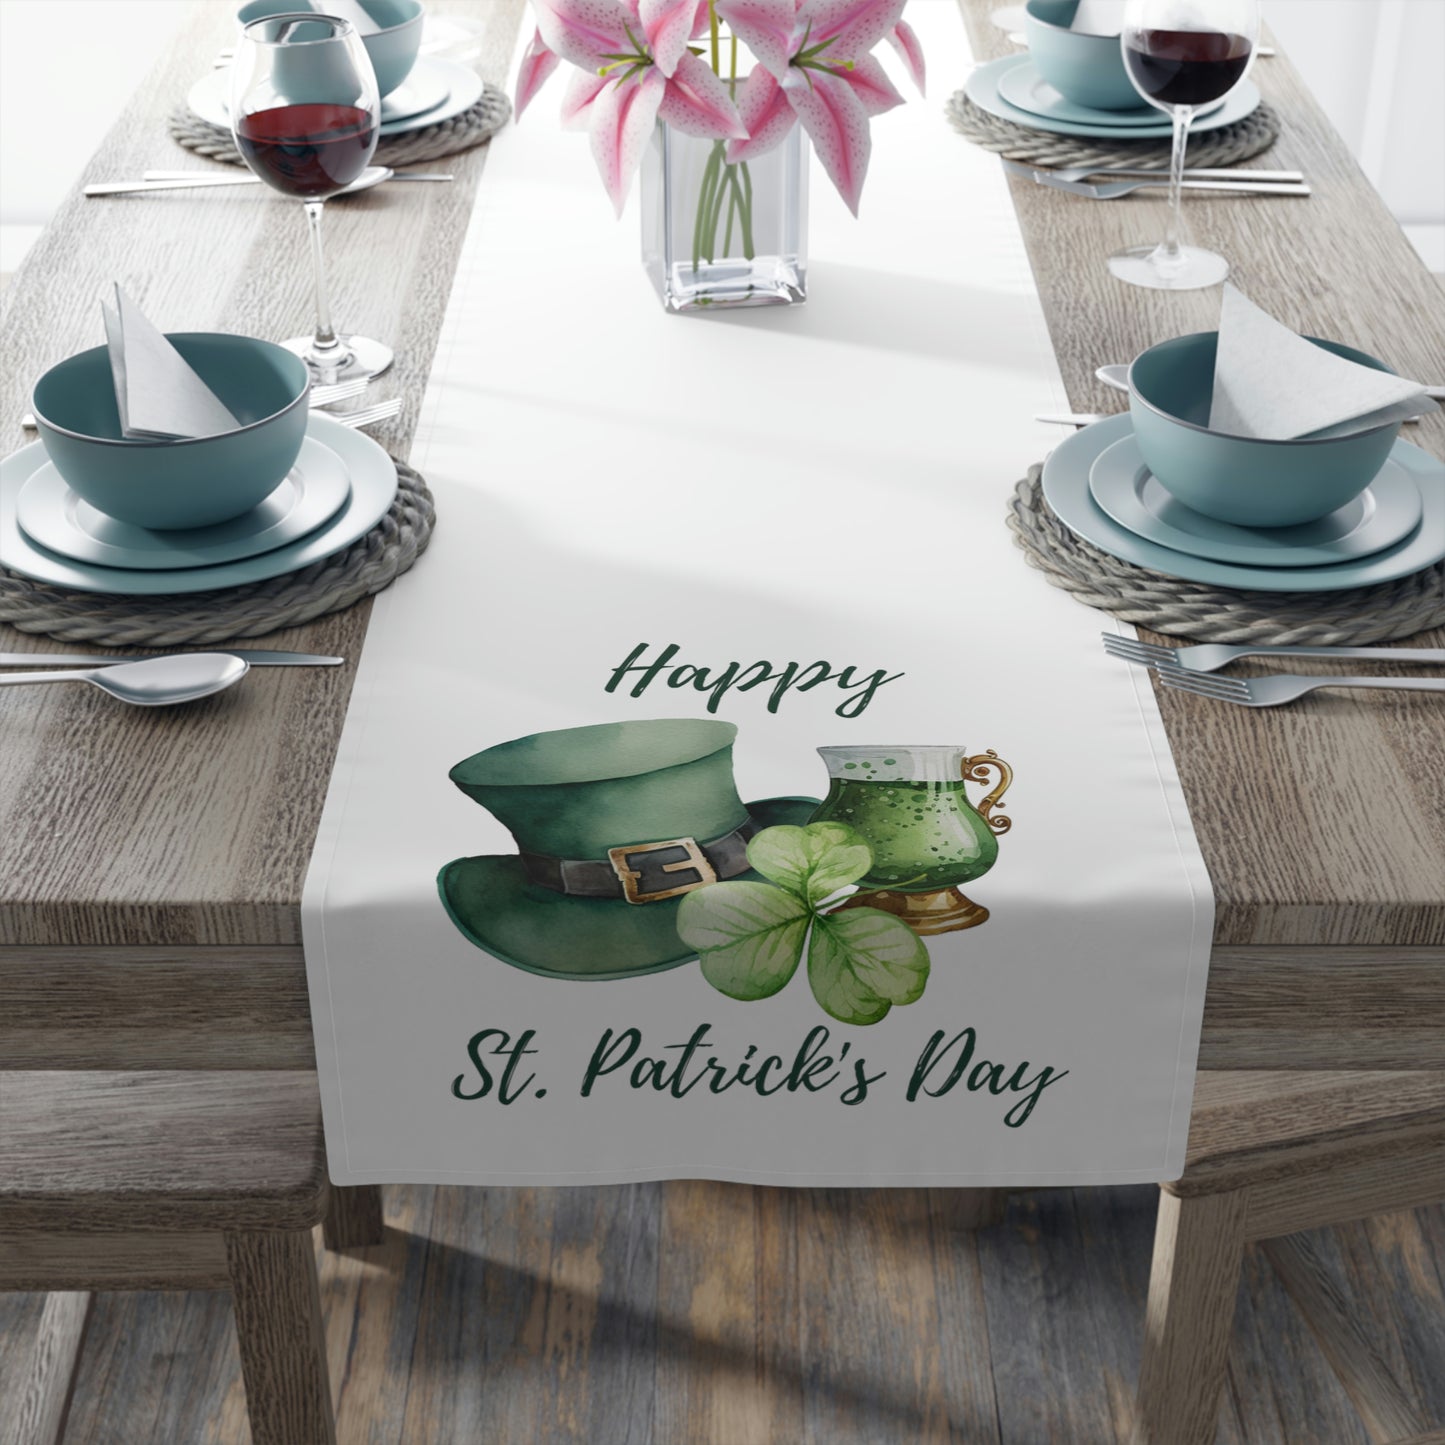 st patricks day table runner with green leprachaun hat, a clover leaf and a green irish drink